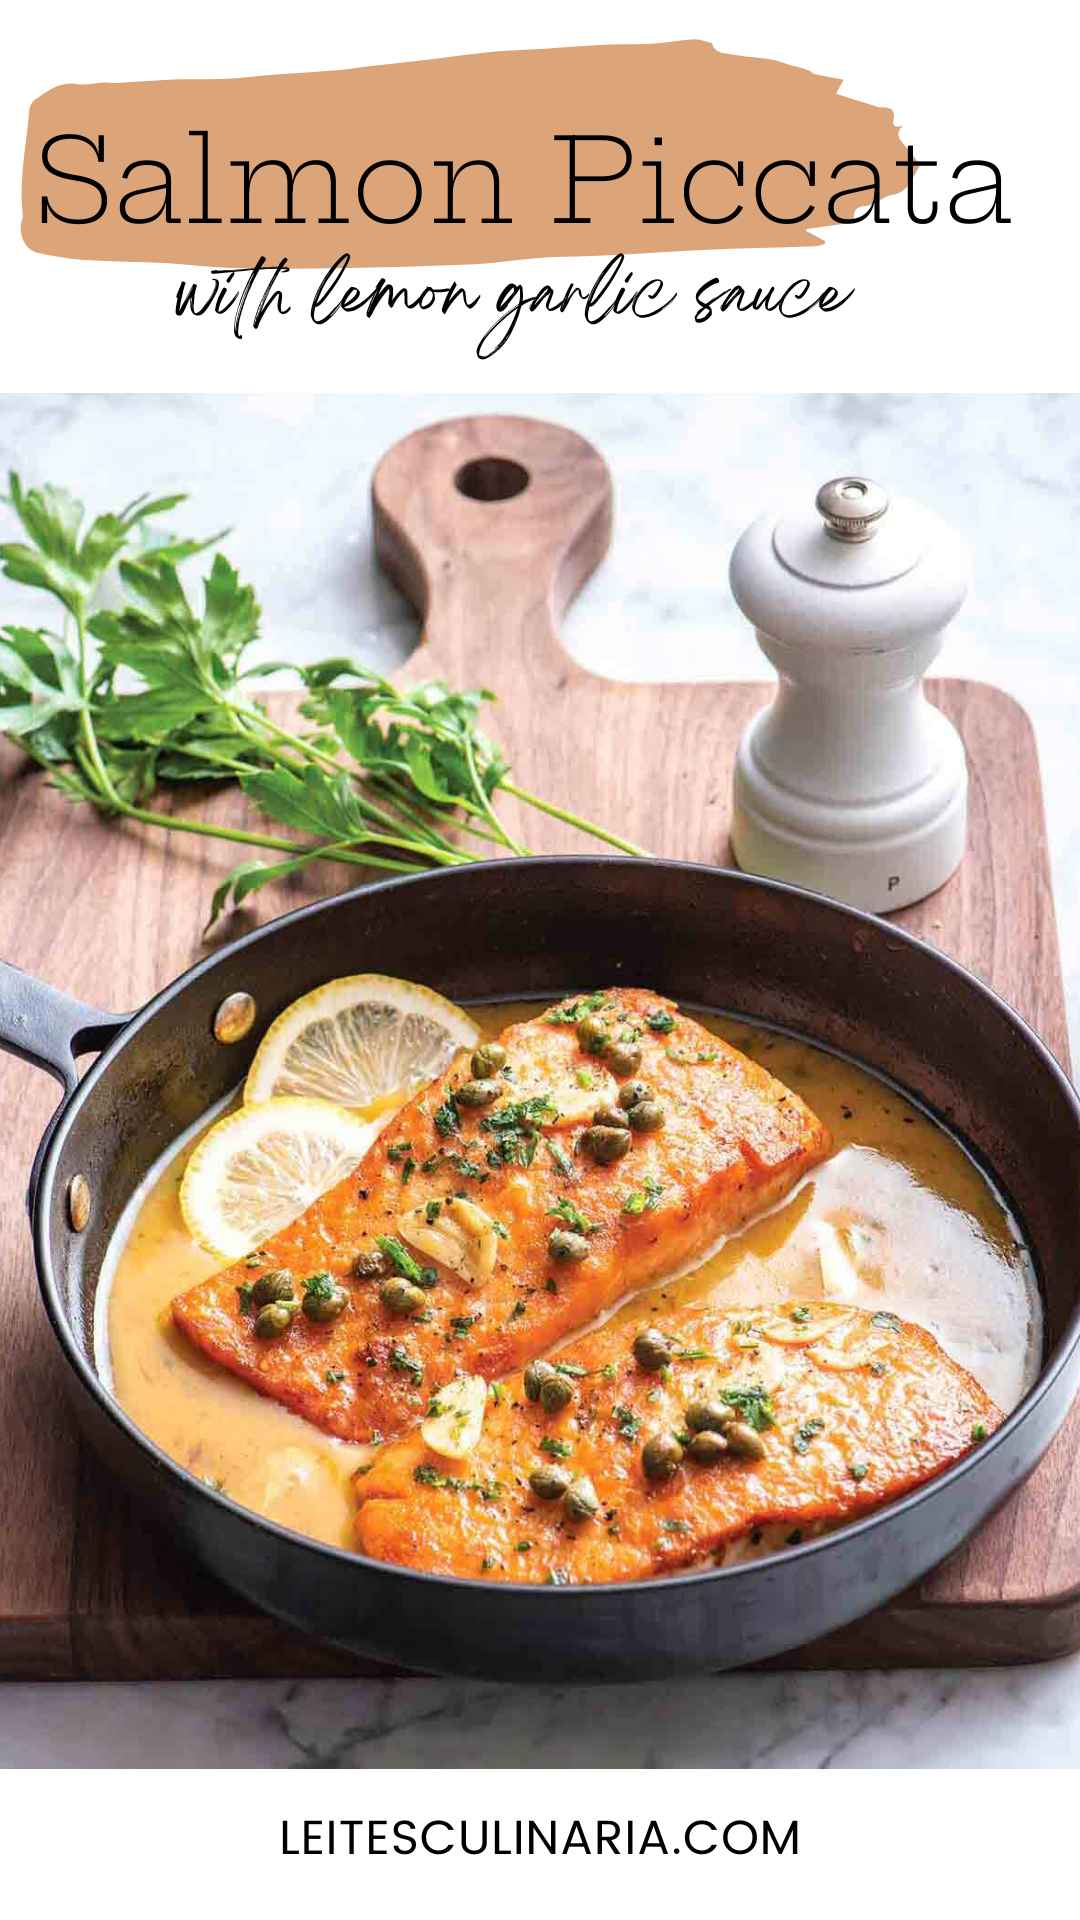 Two salmon fillets in a skillet with sliced lemons, capers and butter sauce.